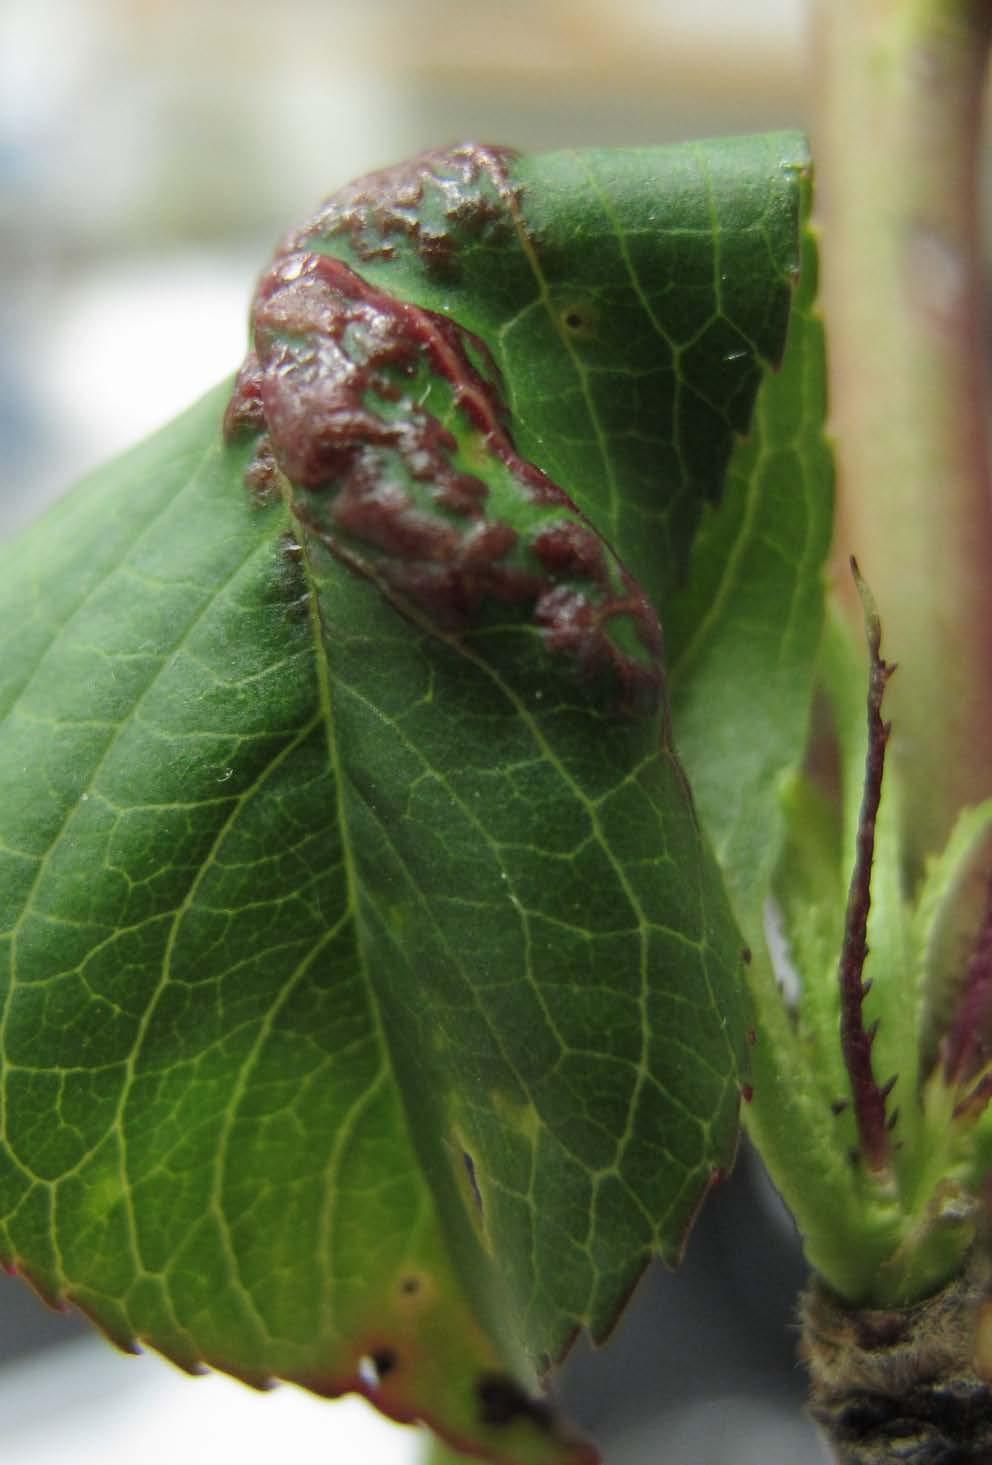 PEACH LEAF CURL Taphrina deformans peach/nectarine only overwinters as spores on tree surfaces new infections only